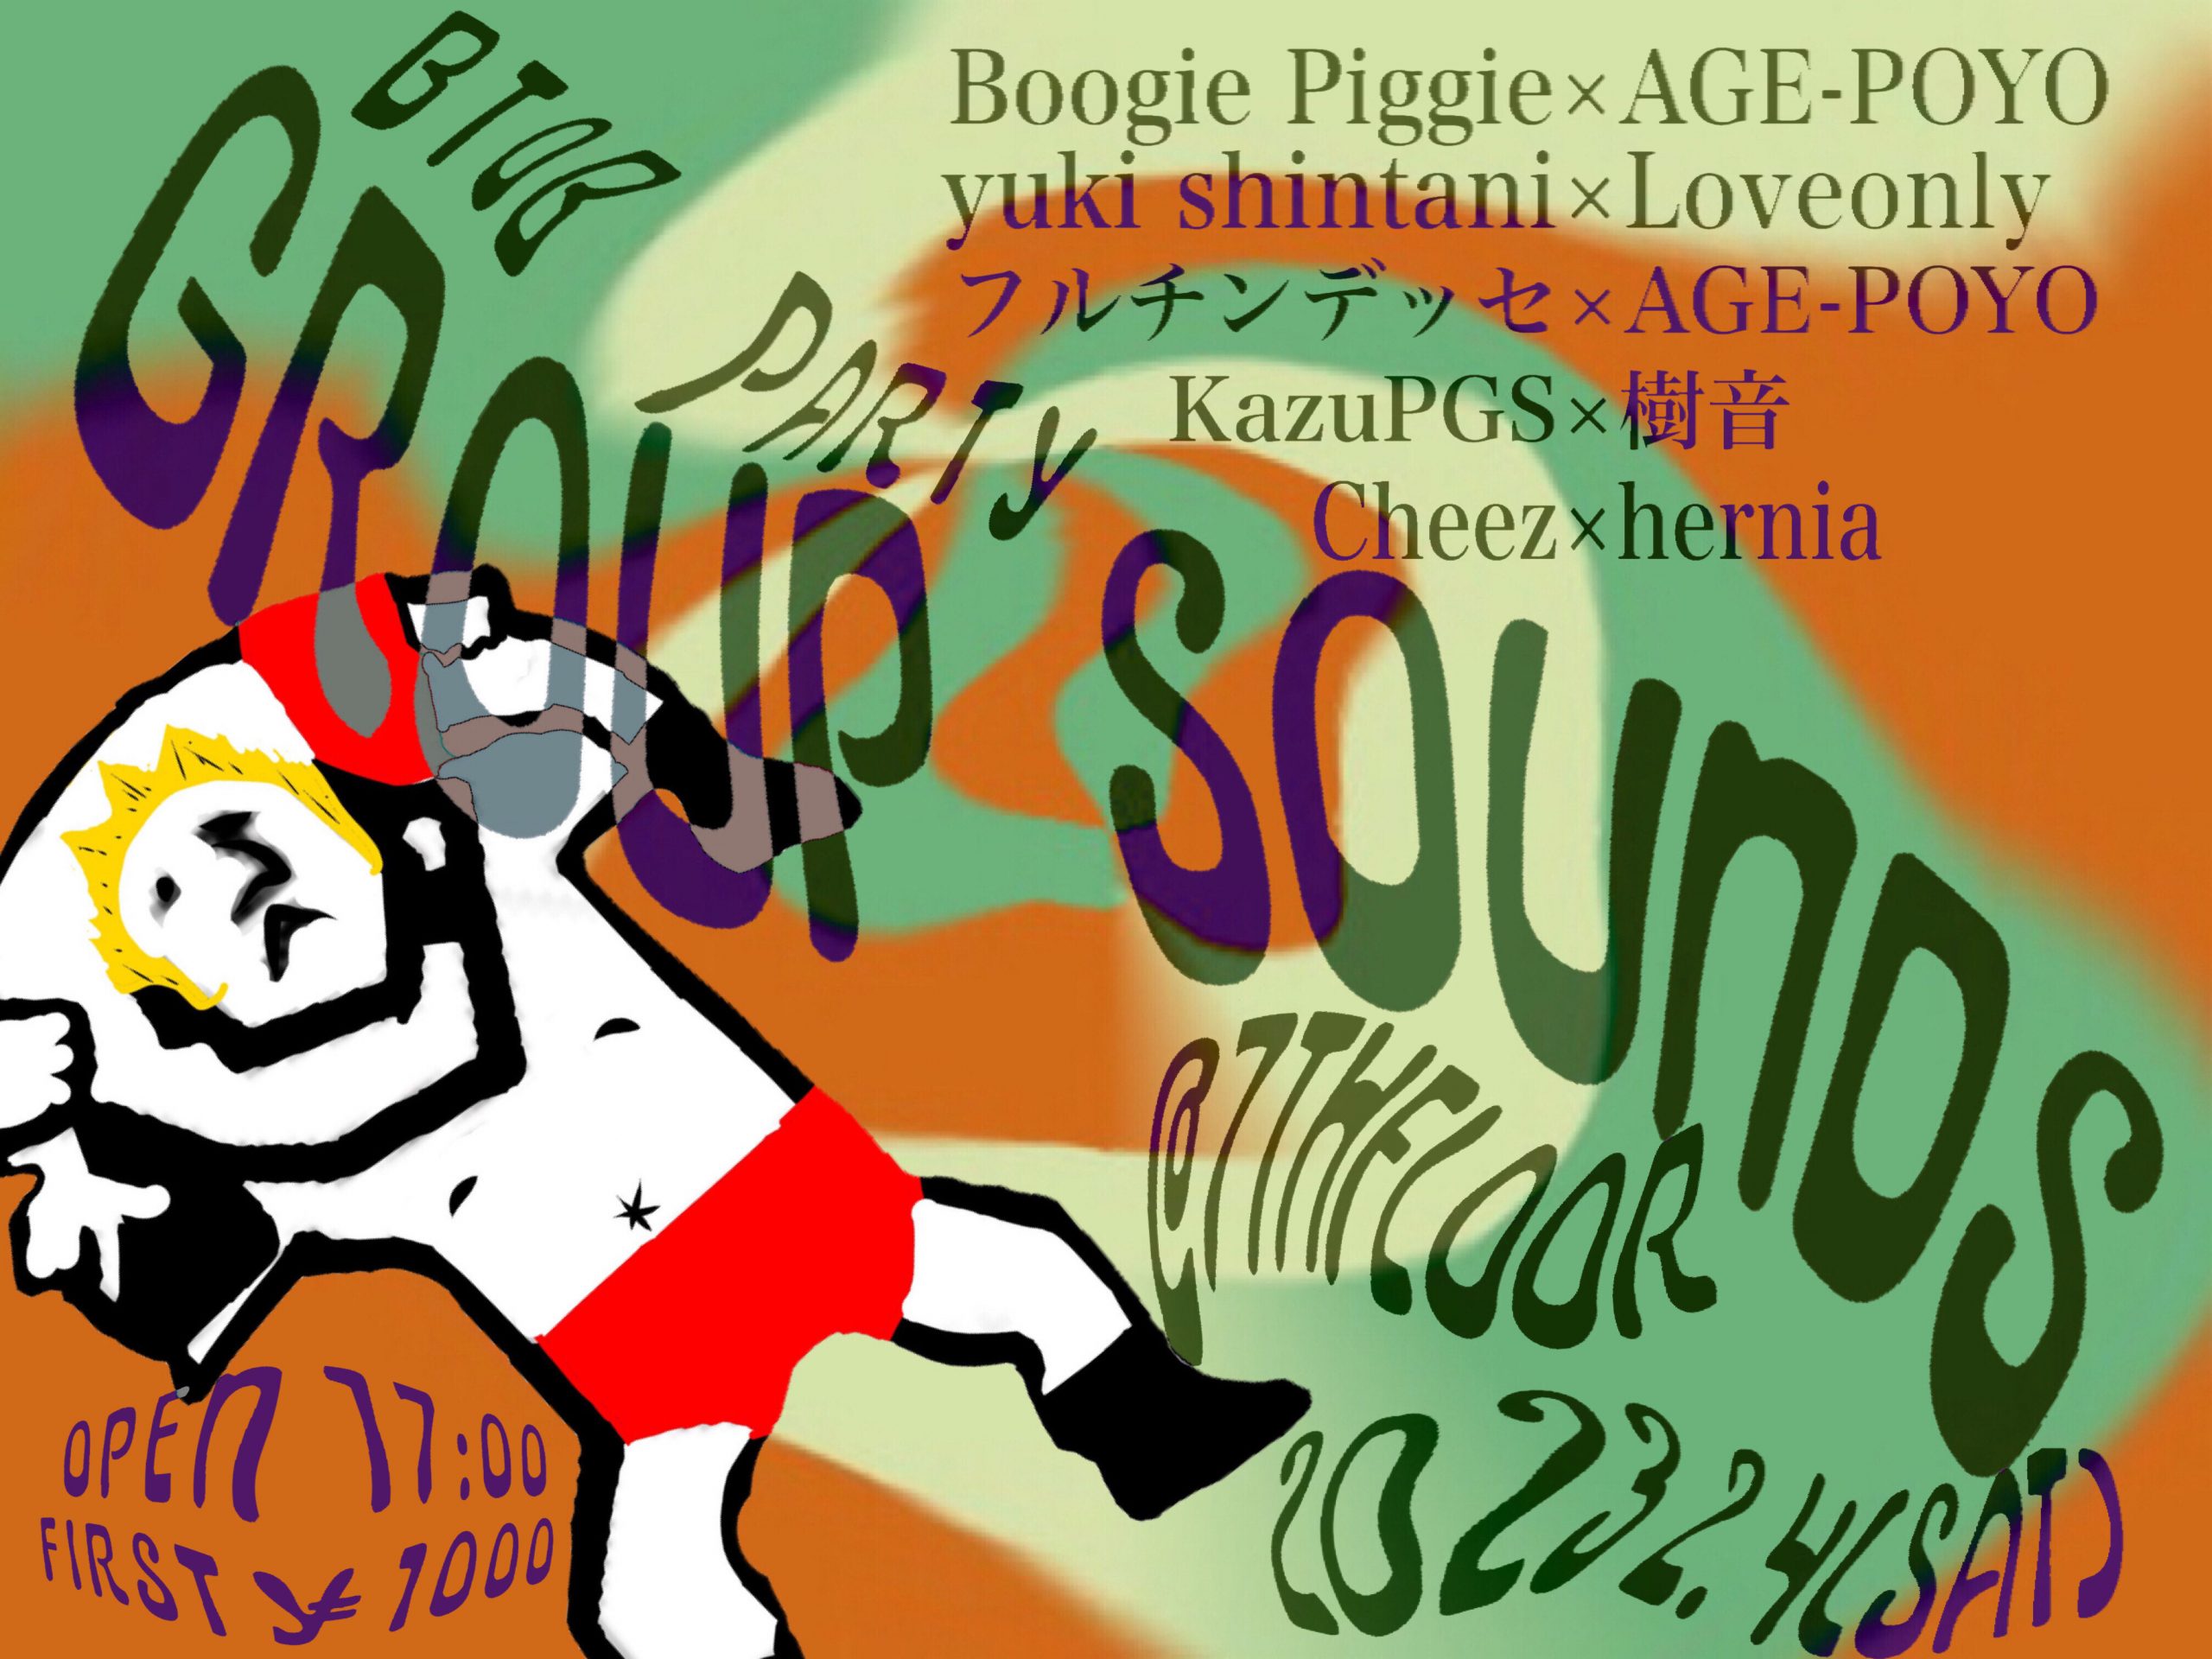 Group sounds